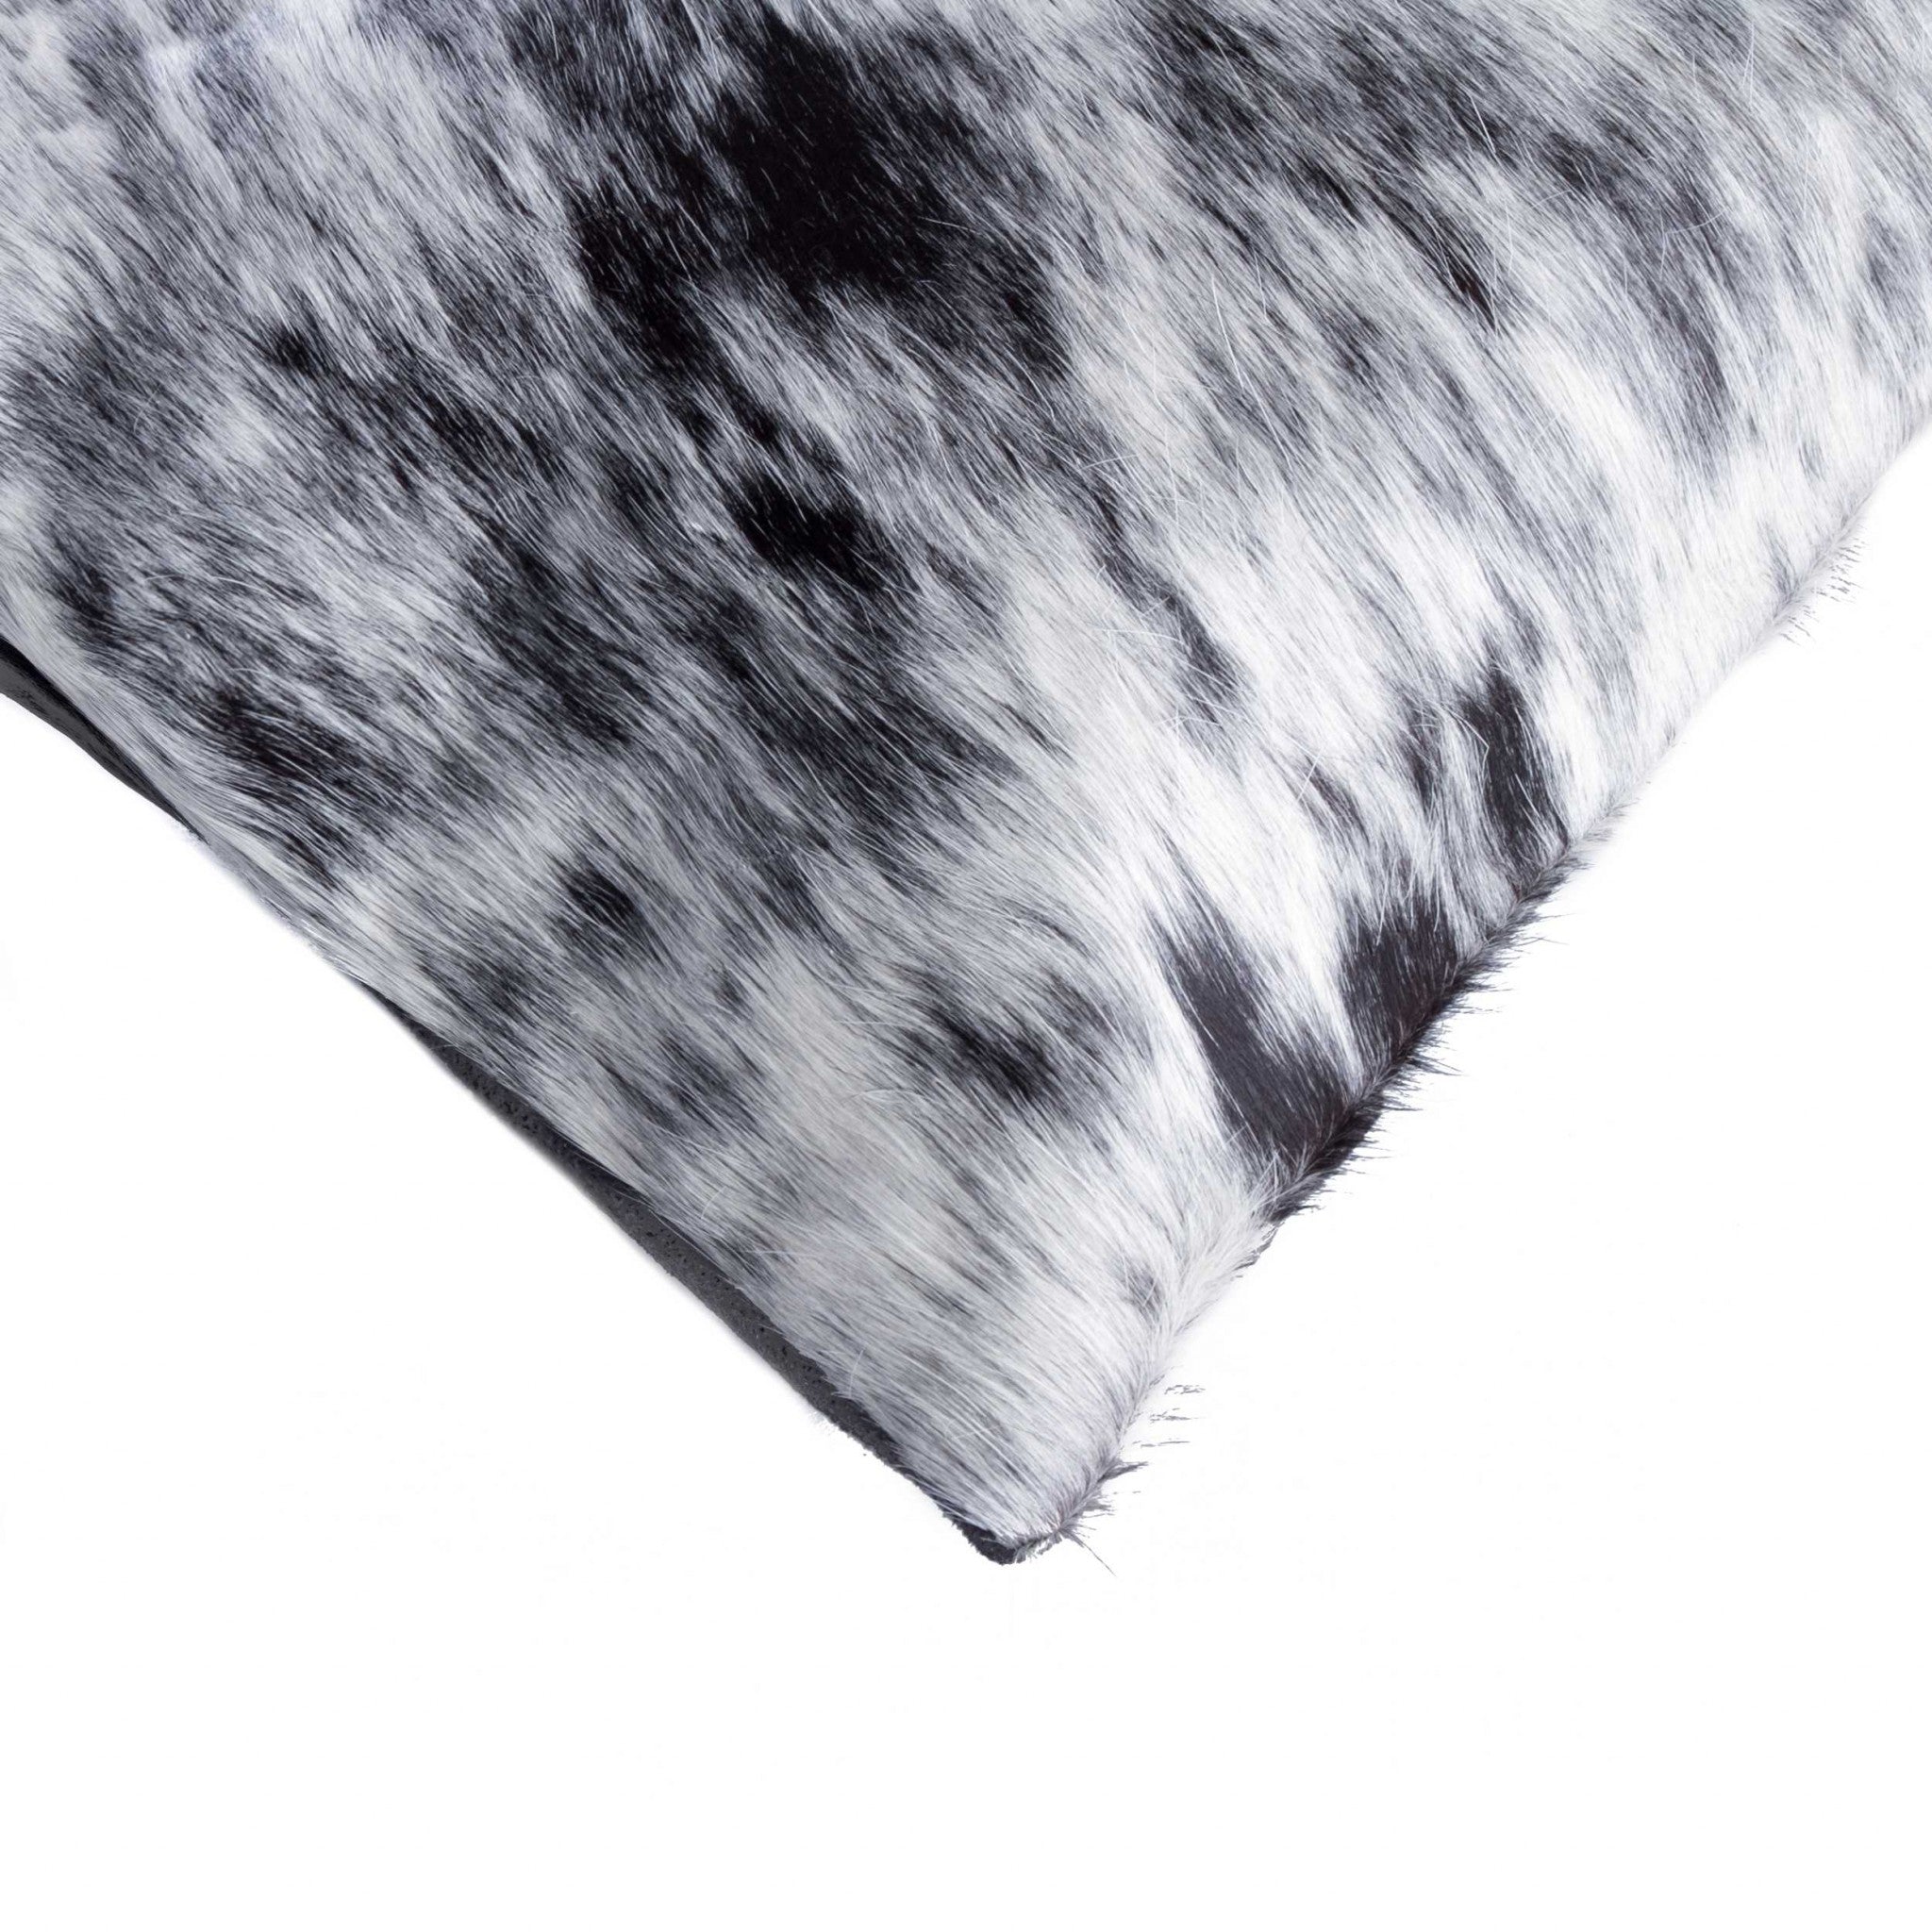 18" X 18" X 5" Salt And Pepper Black And White Cowhide  Pillow